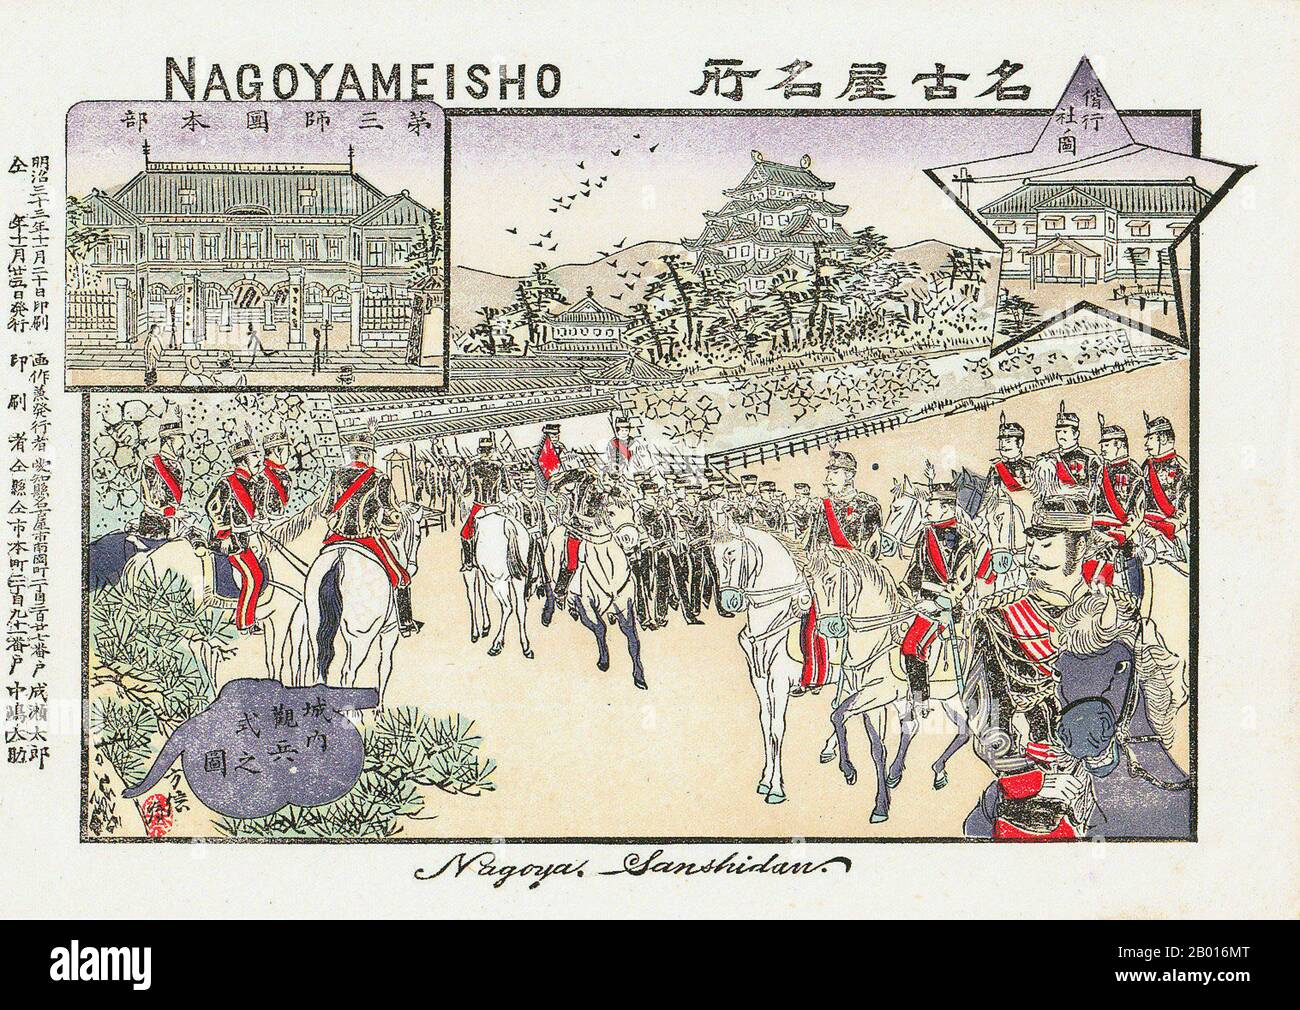 Japan: 'A Military Parade in Nagoya'. Ukiyo-e woodblock print, 1900.  Troops from the Third Infantry Division Headquarters on parade in Nagoya.  Nagoya is the third-largest city and the fourth most populous urban area in Japan. Located on the Pacific coast in the Chūbu region of central Honshū, it is the capital of Aichi Prefecture and is one of Japan's major ports along with those of Tokyo, Osaka, Kobe, Yokohama, Chiba, and Moji. It is also the center of Japan's third largest metropolitan region, known as the Chūkyō Metropolitan Area. Stock Photo